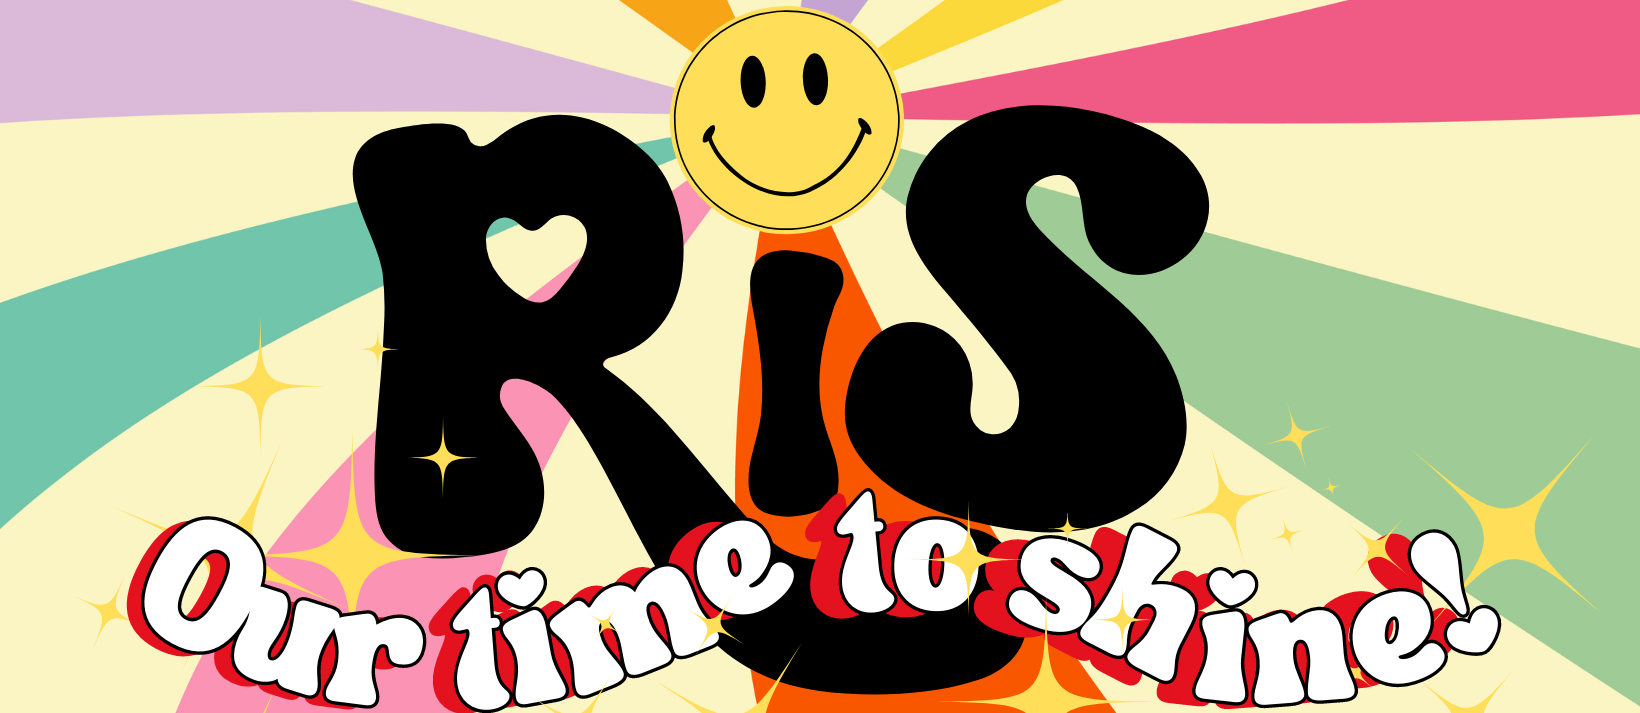 RIS logo with sunshine and smiey face saying "our time to shine"